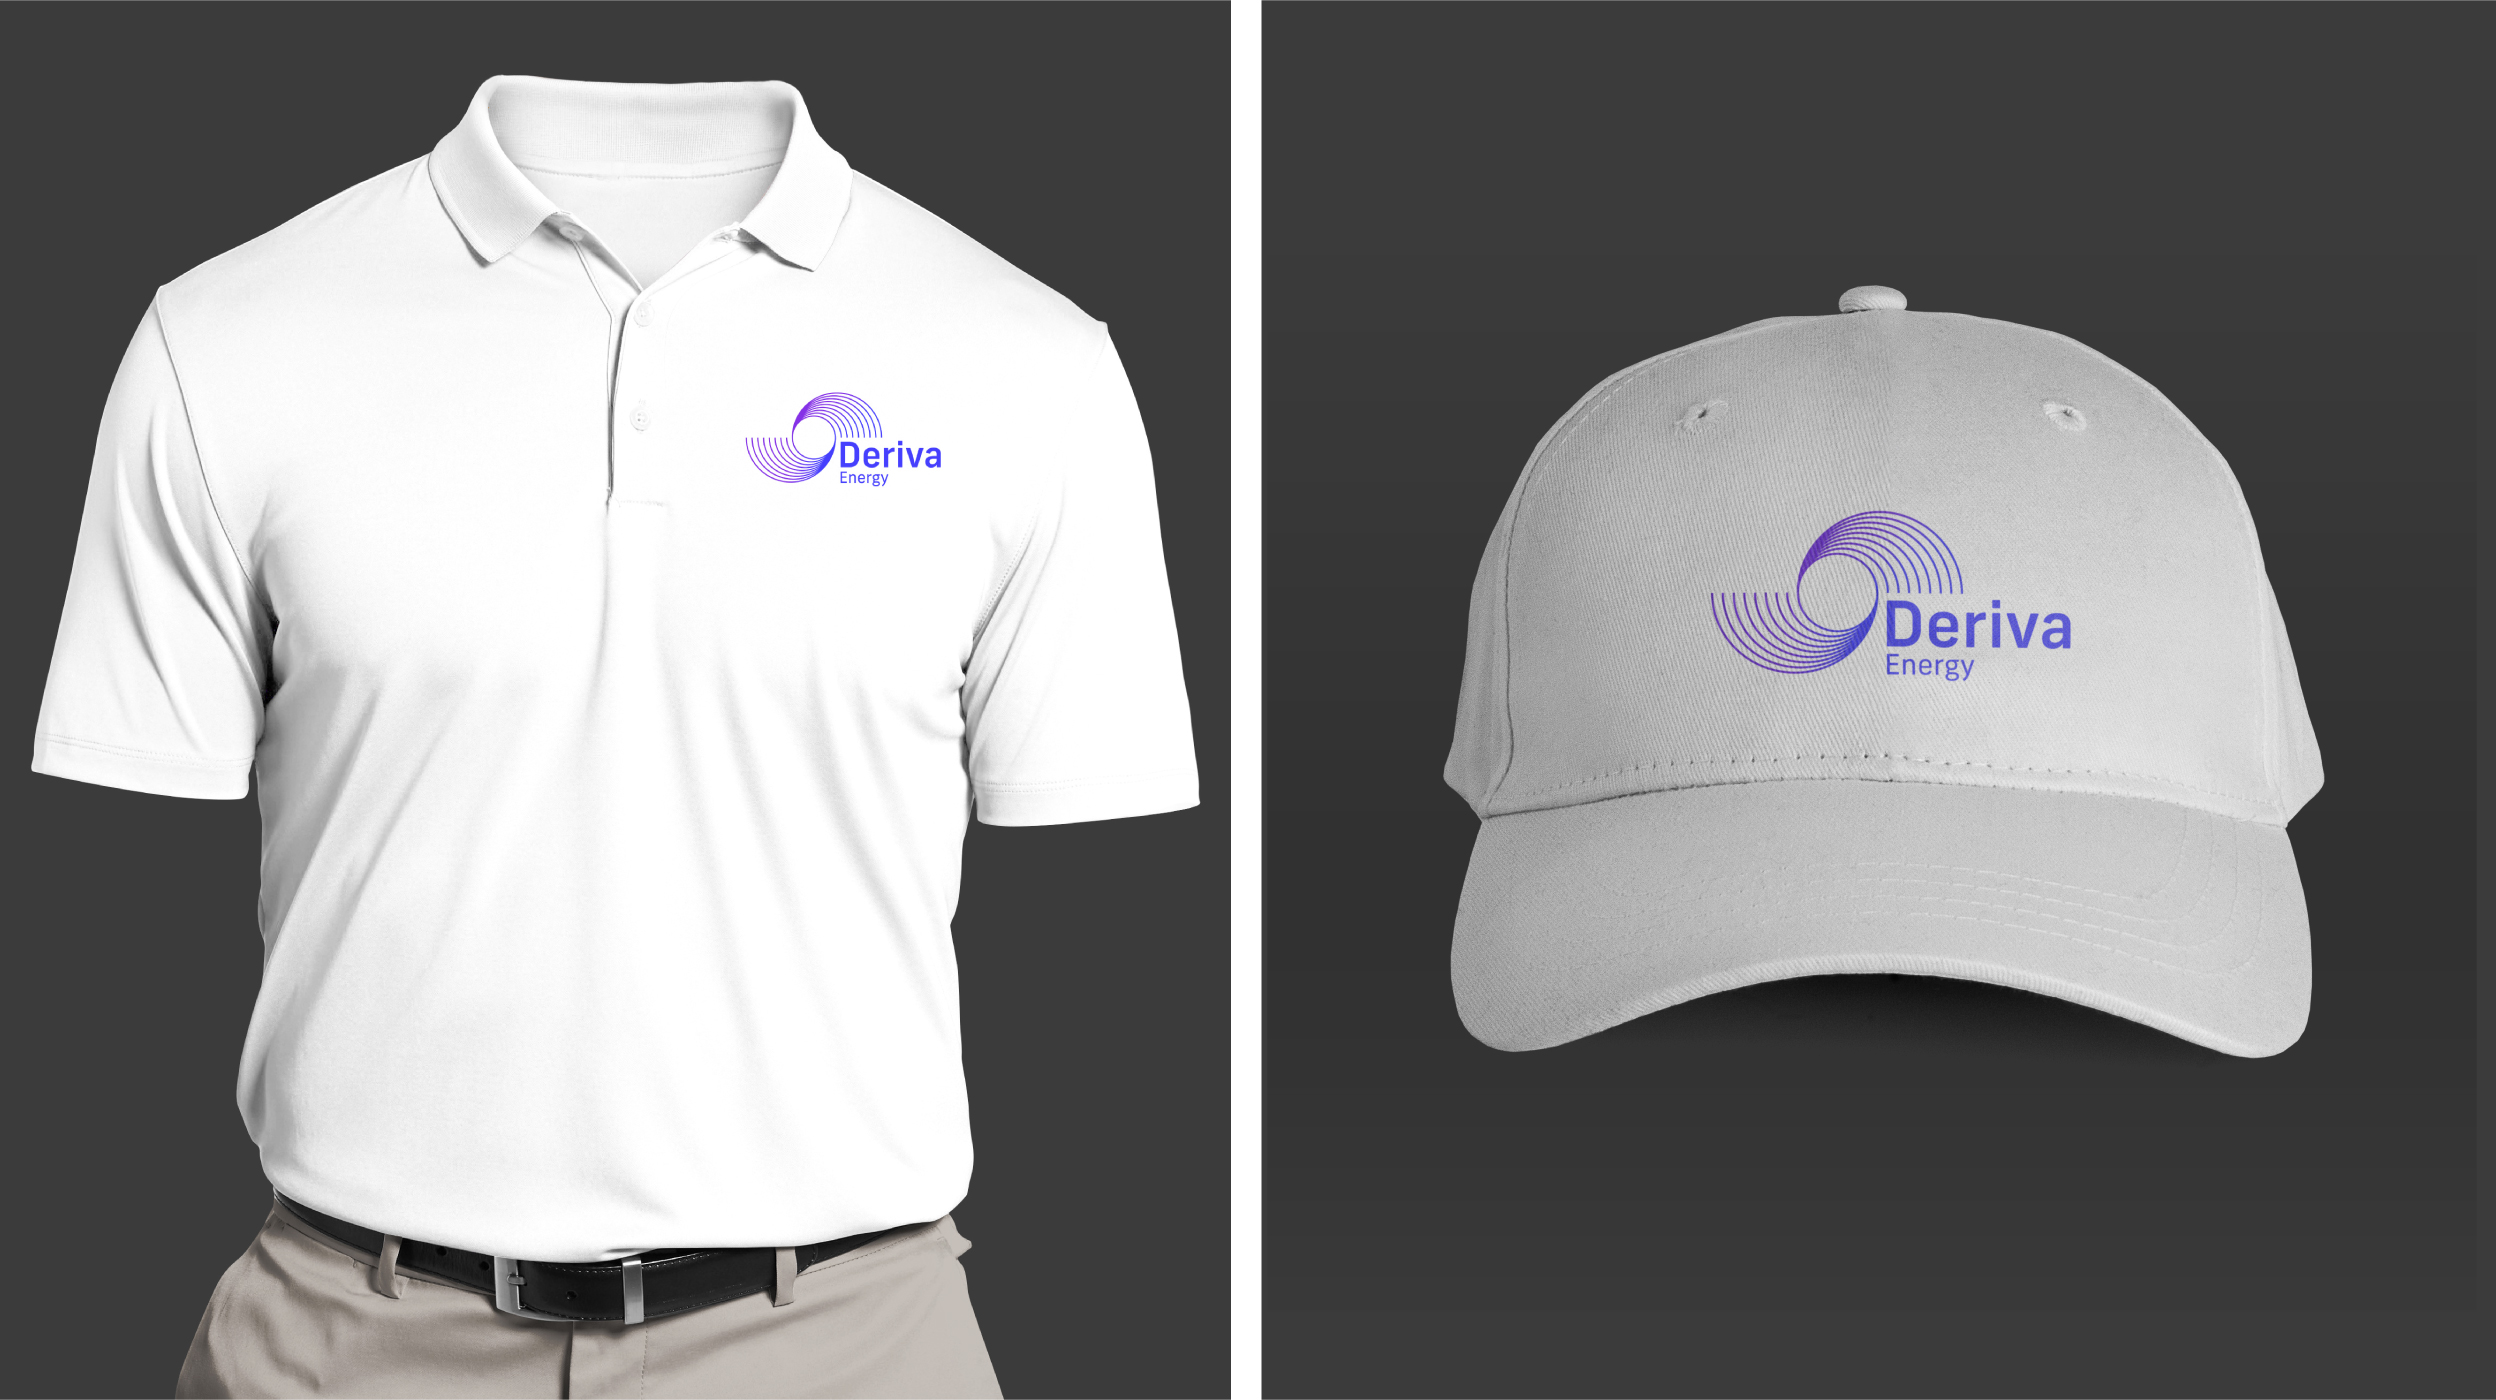 tshirt and hat with deriva logo on it